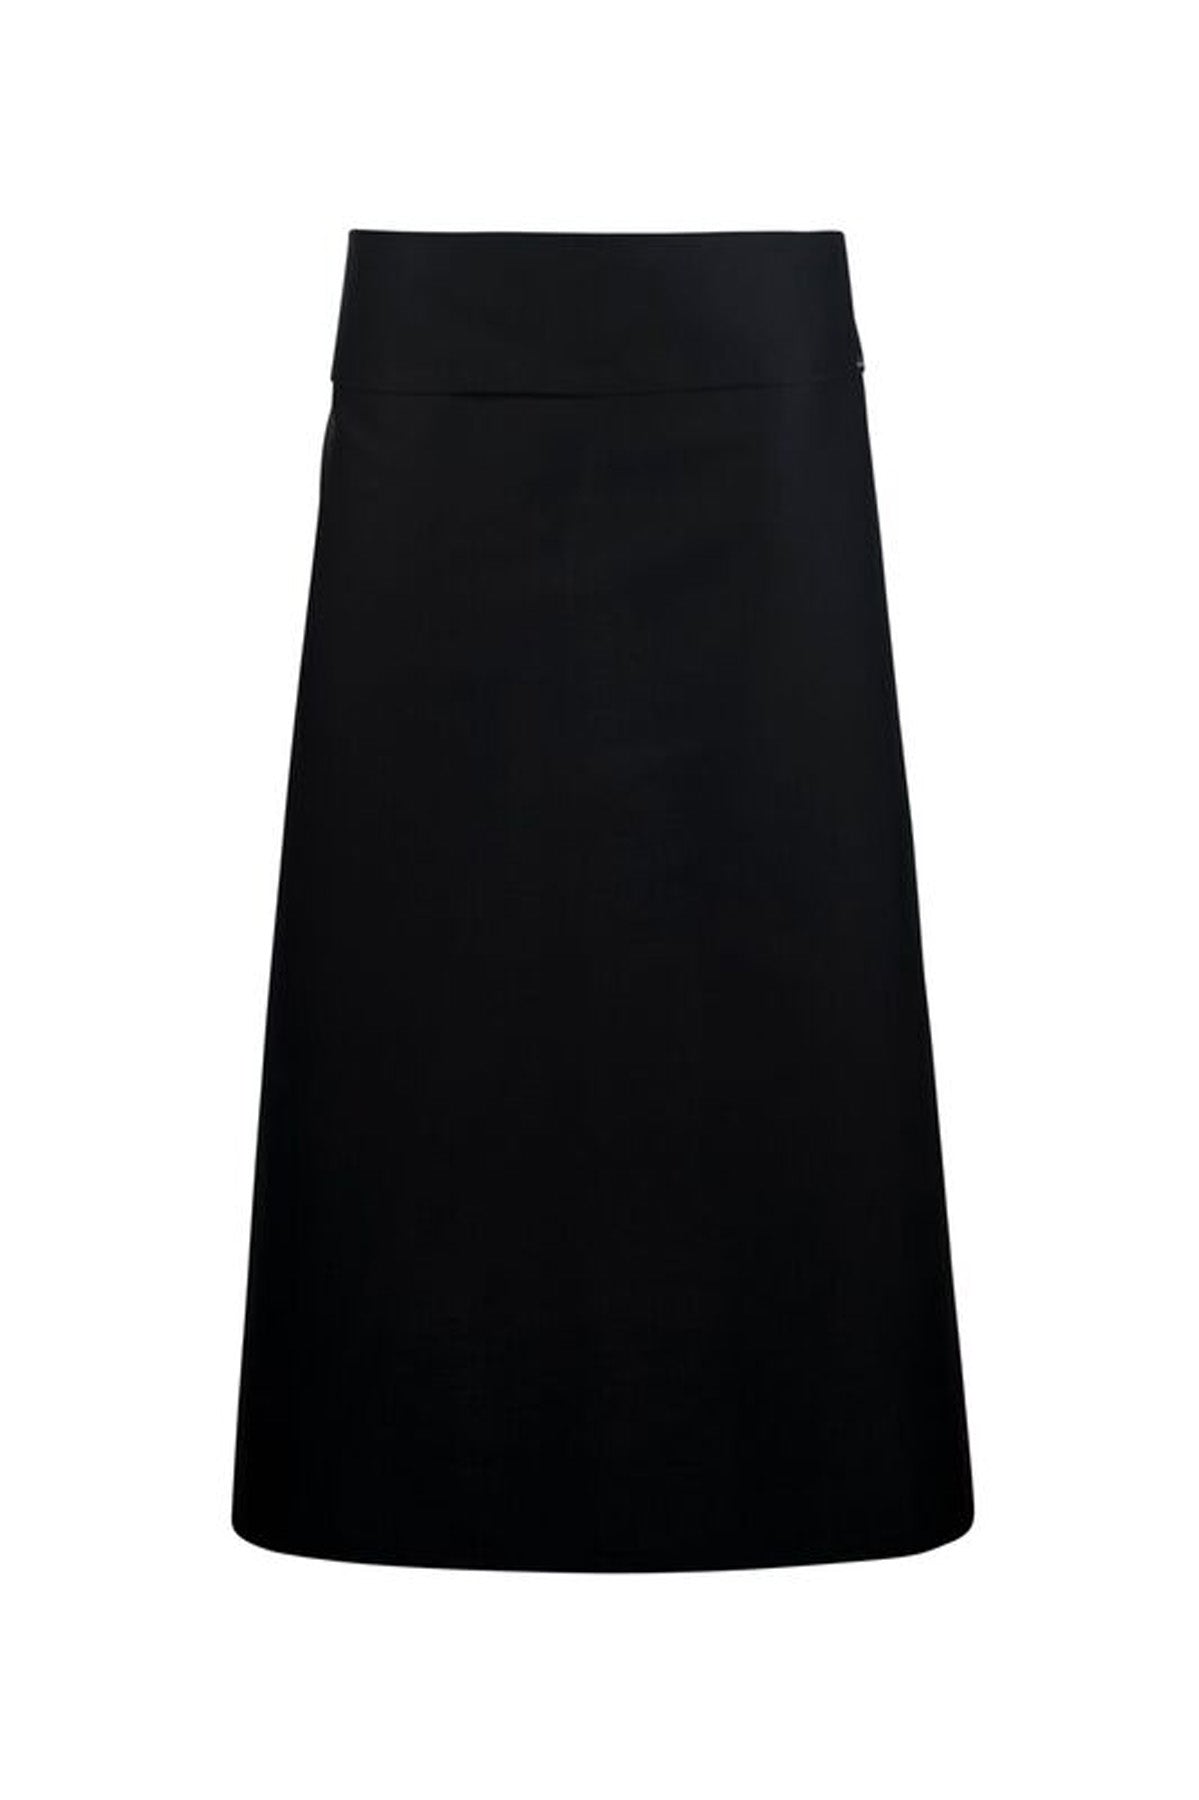 Continental Apron with Fold Over - made by ChefsCraft